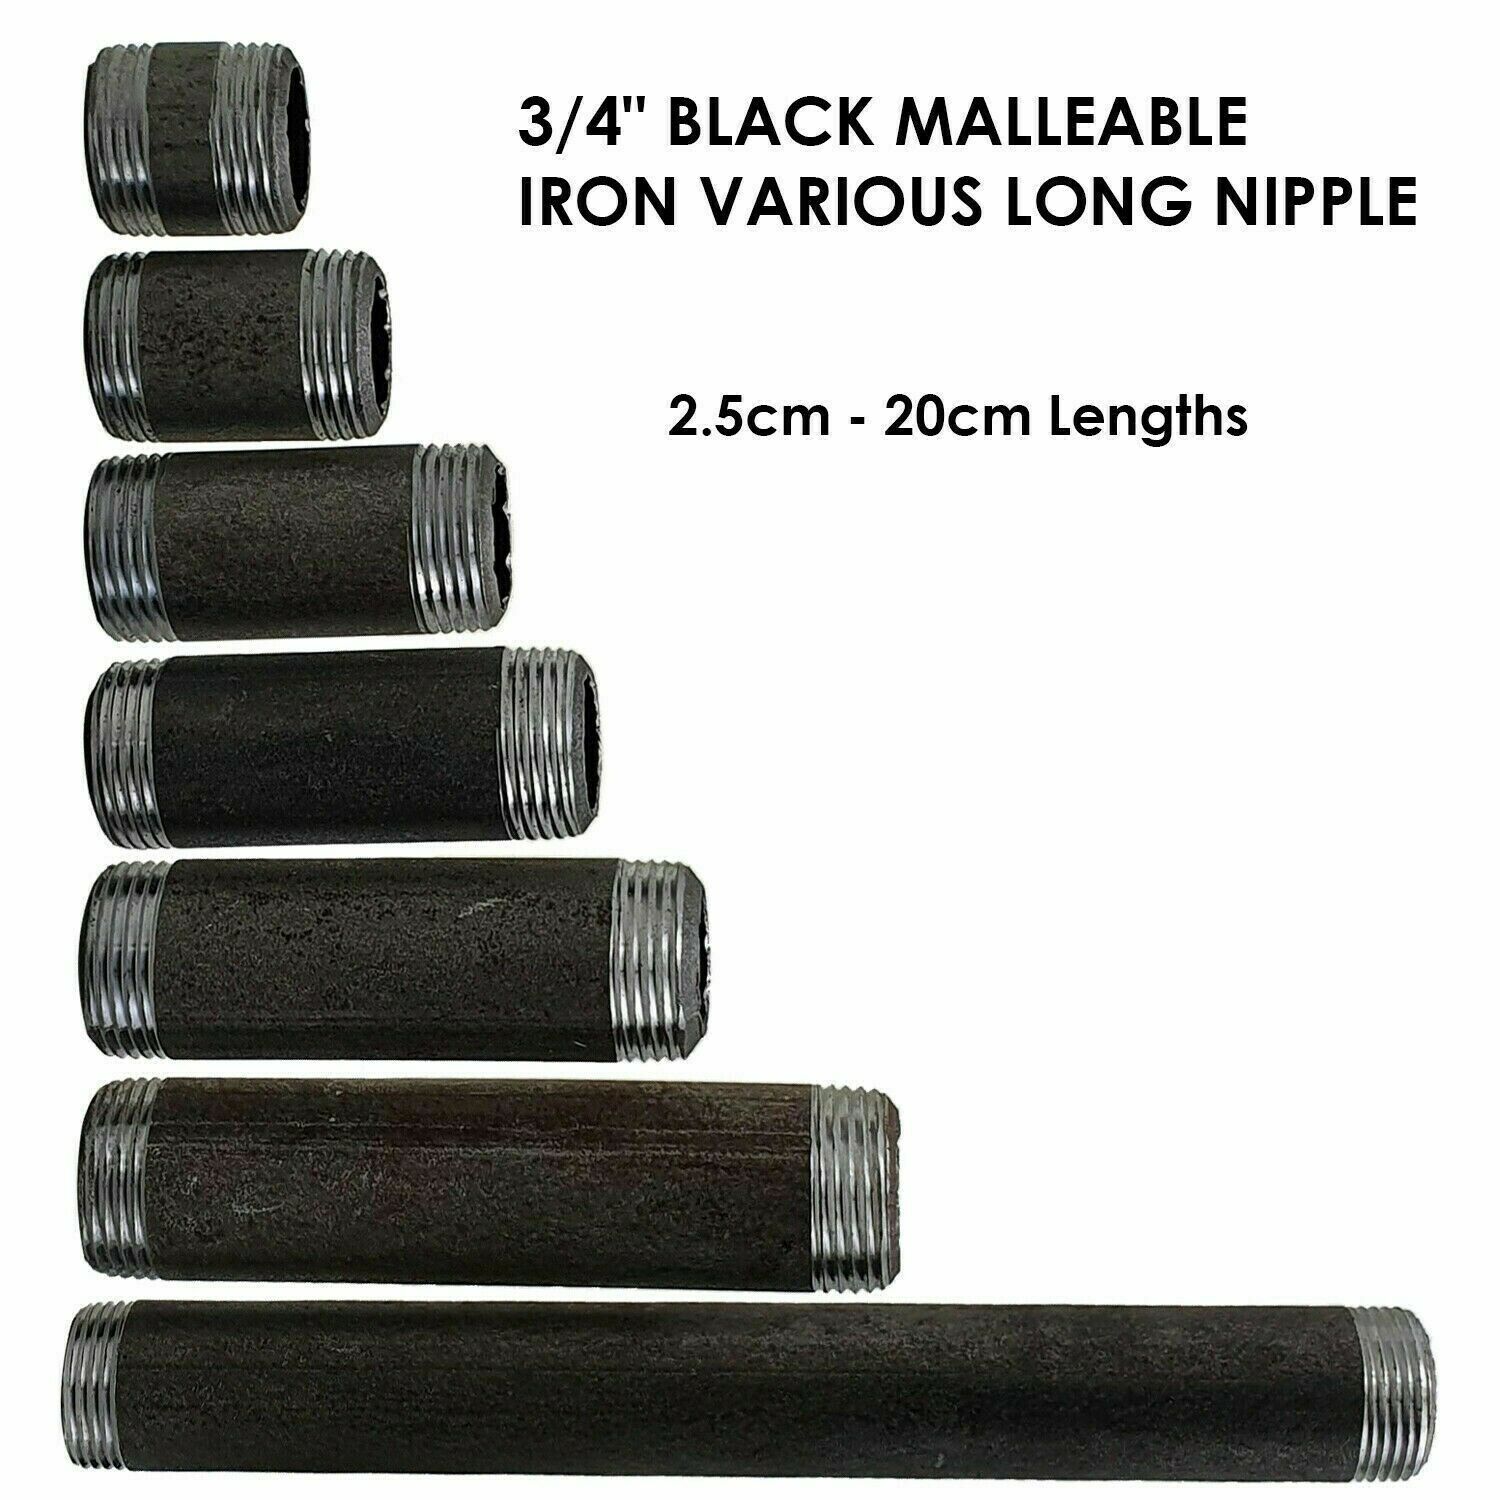 ¾ inch barrel nipple malleable Iron fitting Male BSPT 3/4in to Male BSPT 3/4in - Black Variable sizes from 2.5cm to 60cm~3632 - LEDSone UK Ltd